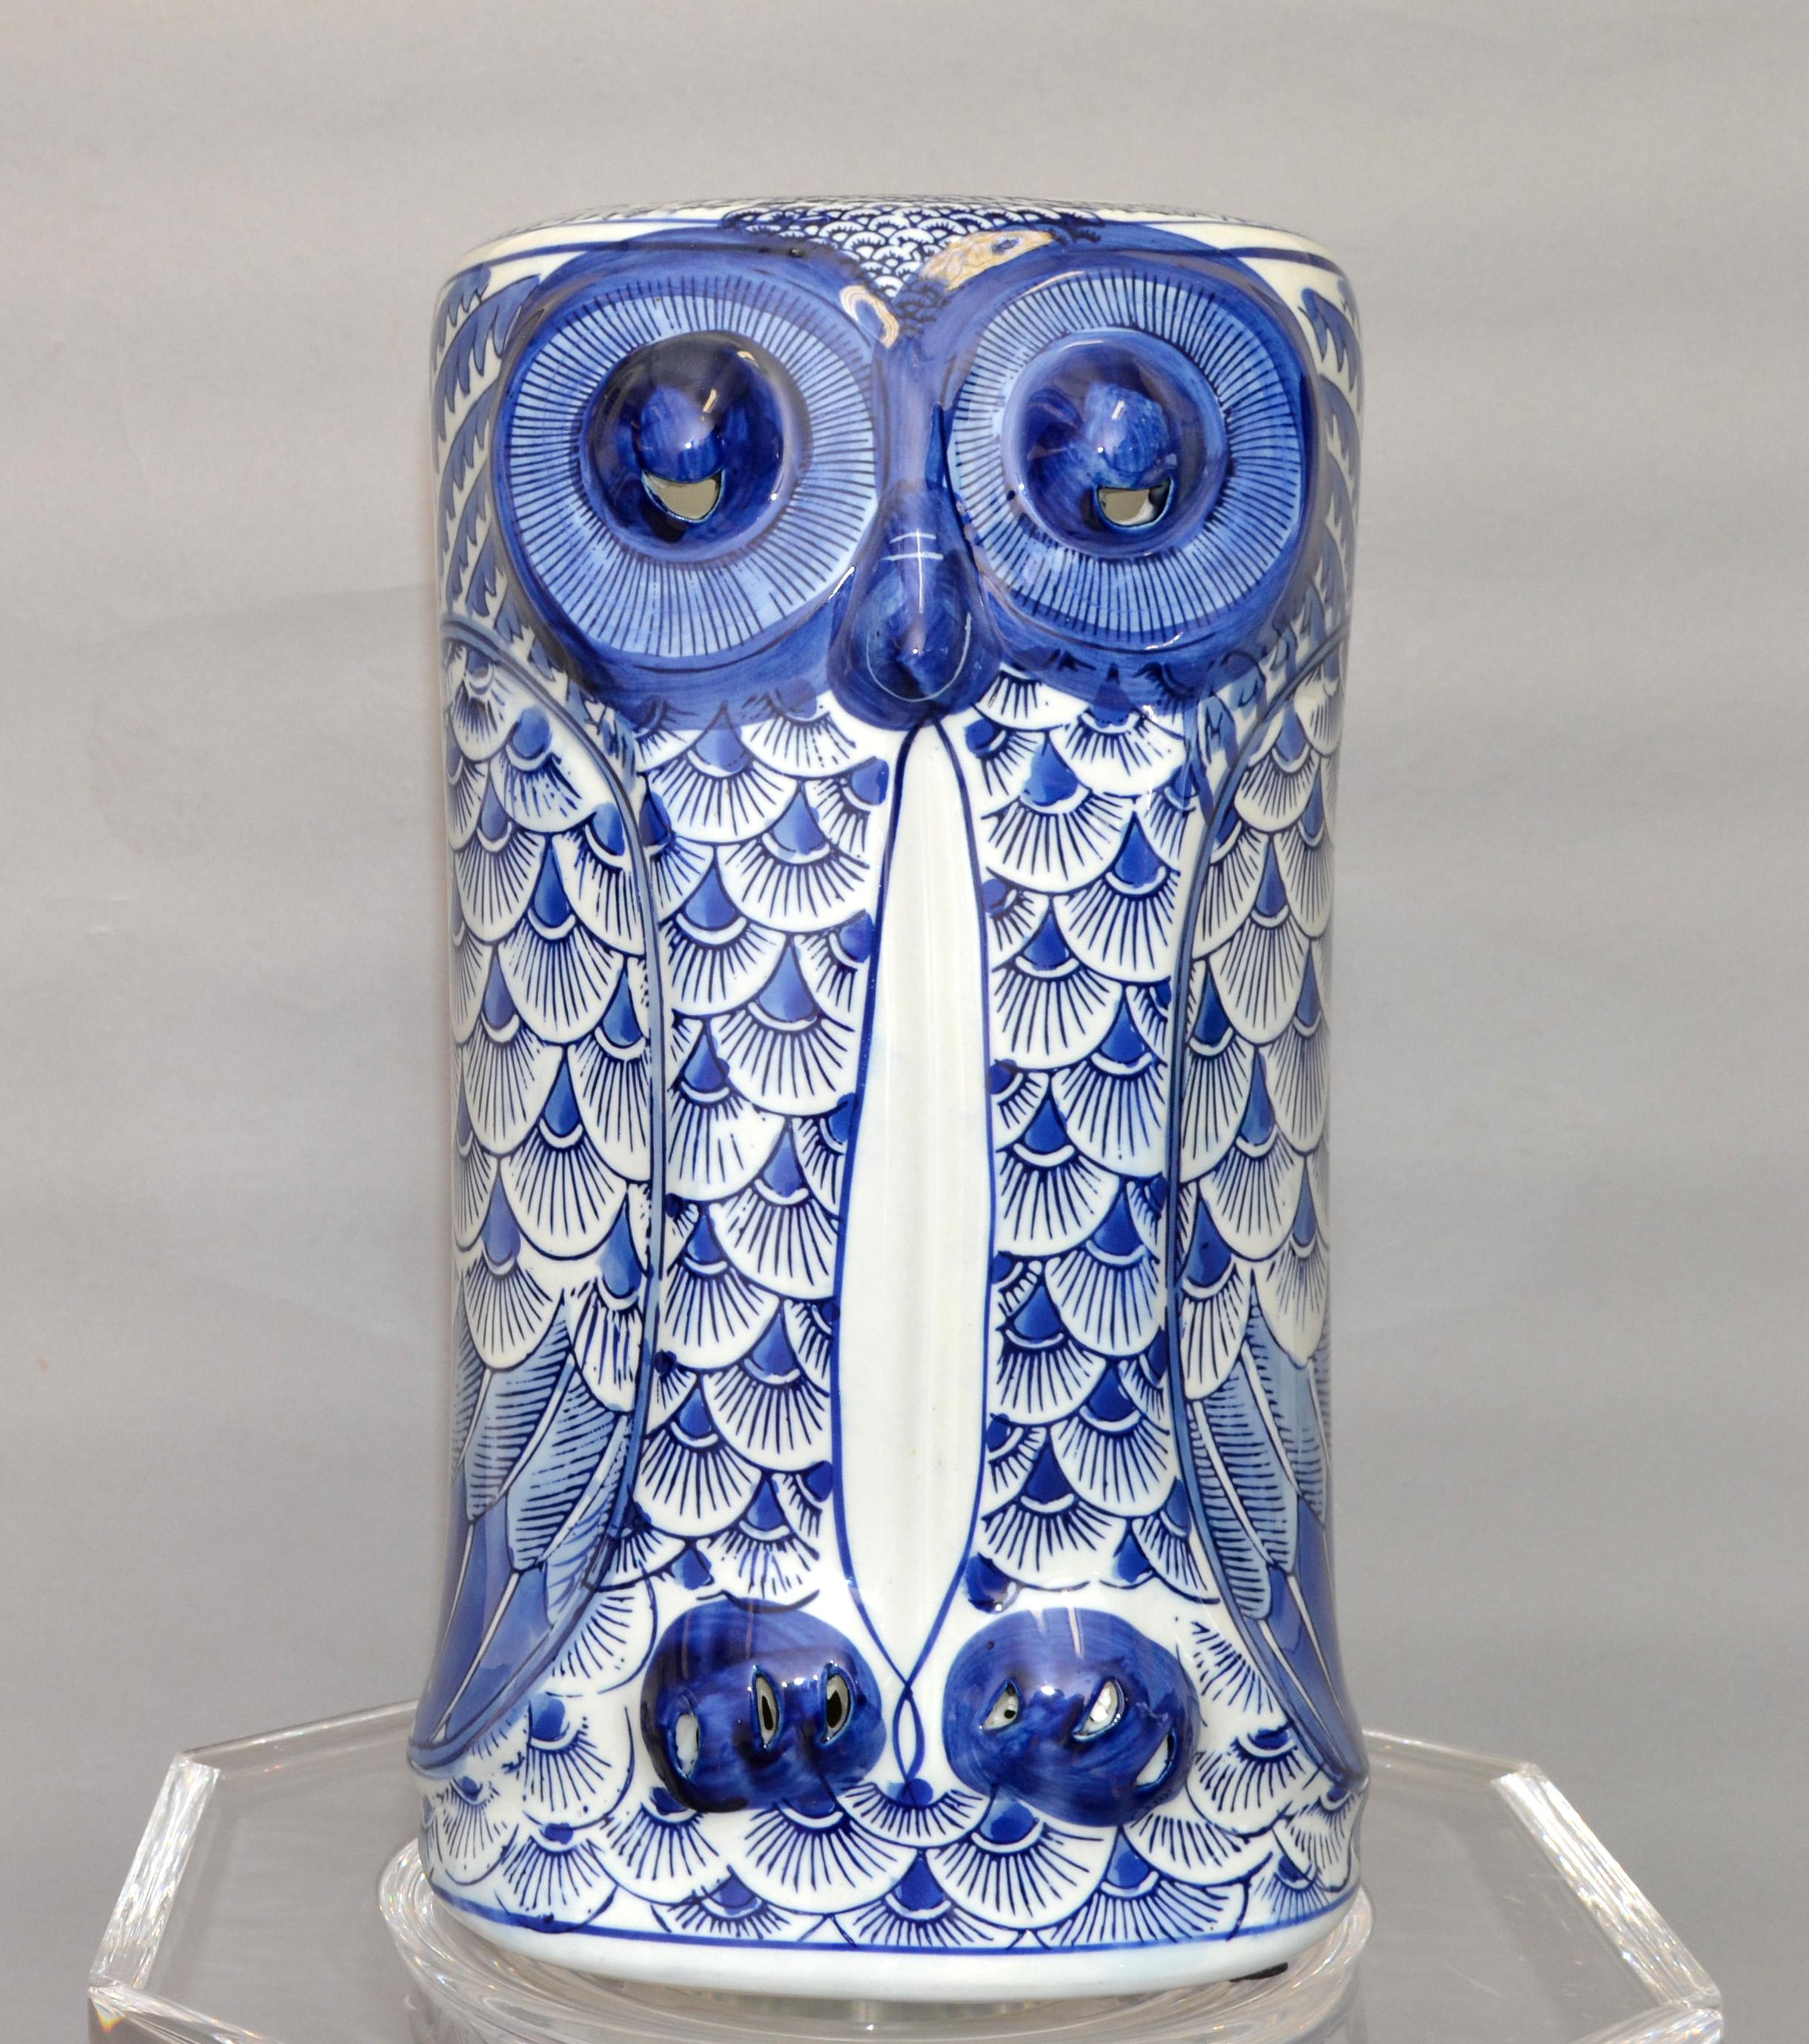 We offer a Chinese blue grey handmade ceramic pottery owl Umbrella Stand, Planter, Vase, Vessel.
Unknown Trademark inside the Owl.
The Asian Art can be used indoor and outdoor.


 